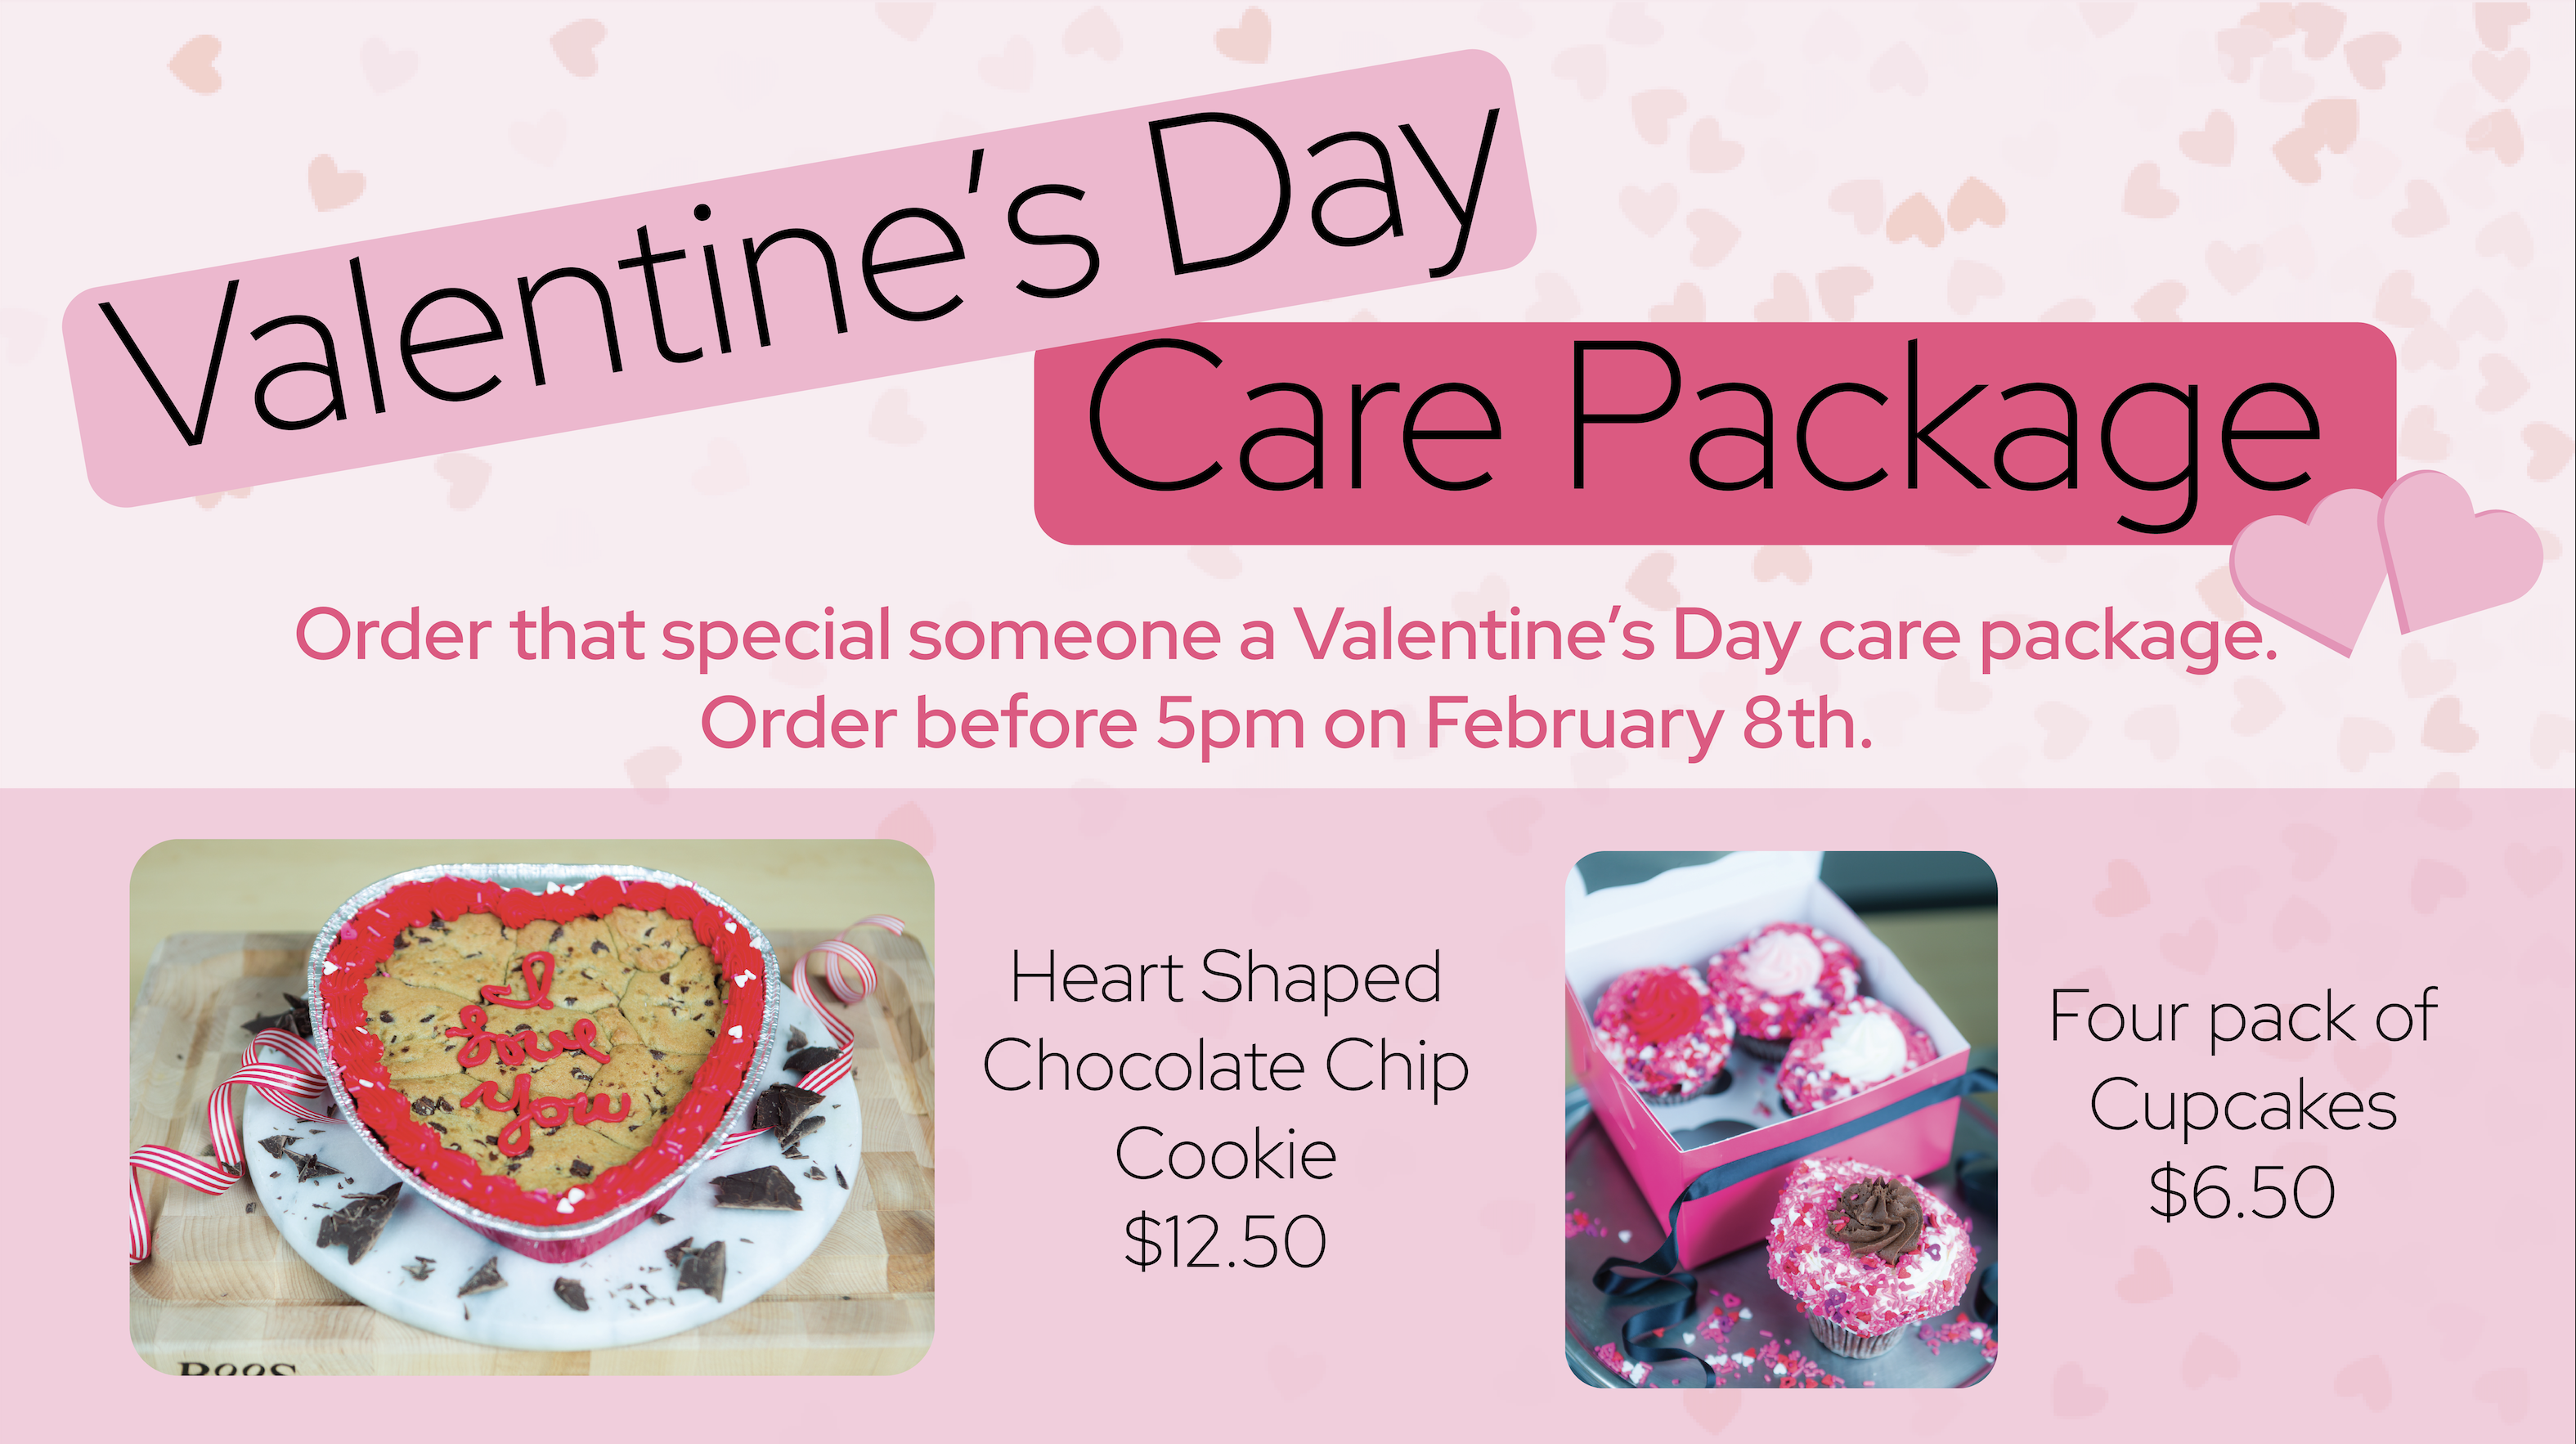 Valentine's Day CarePackage Special